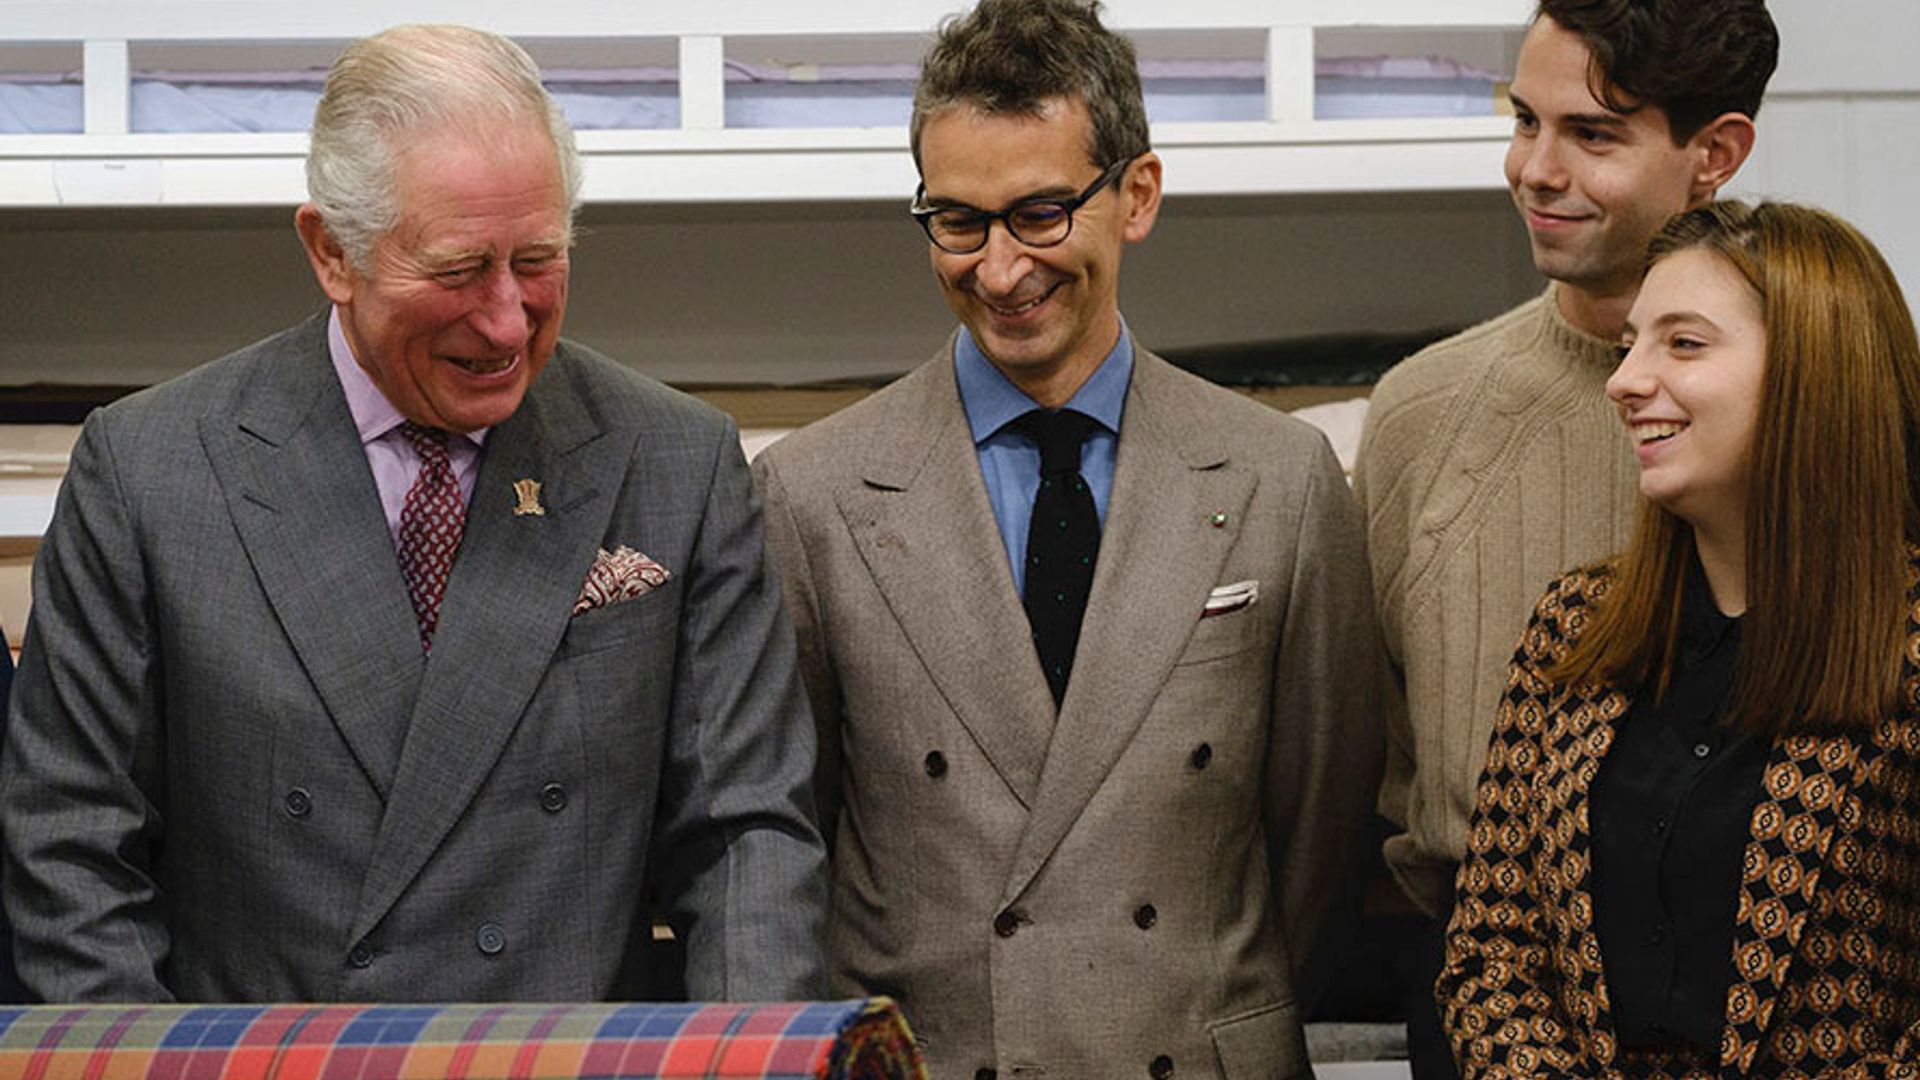 The story behind Prince Charles and YOOX NET-A-PORTER Group's The Modern Artisan fashion collection